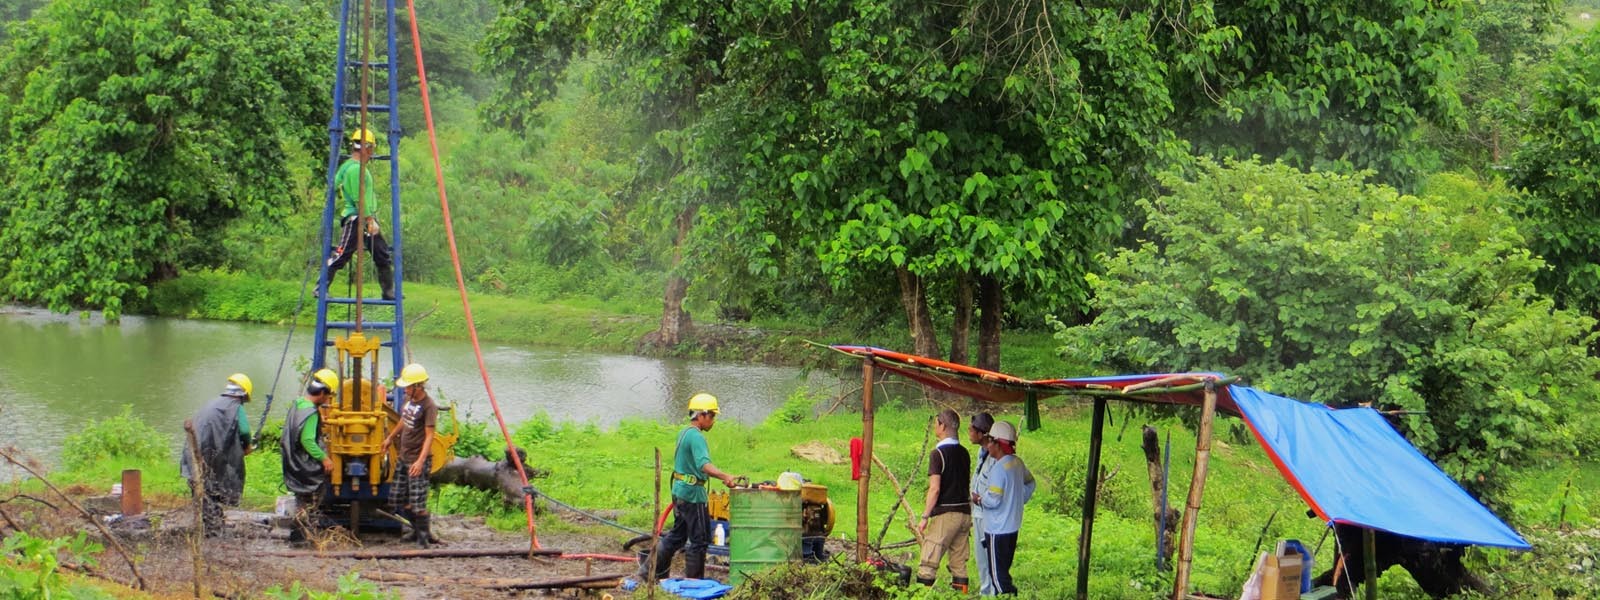 Boreholes and mosquitoes in the Philippines.
View More